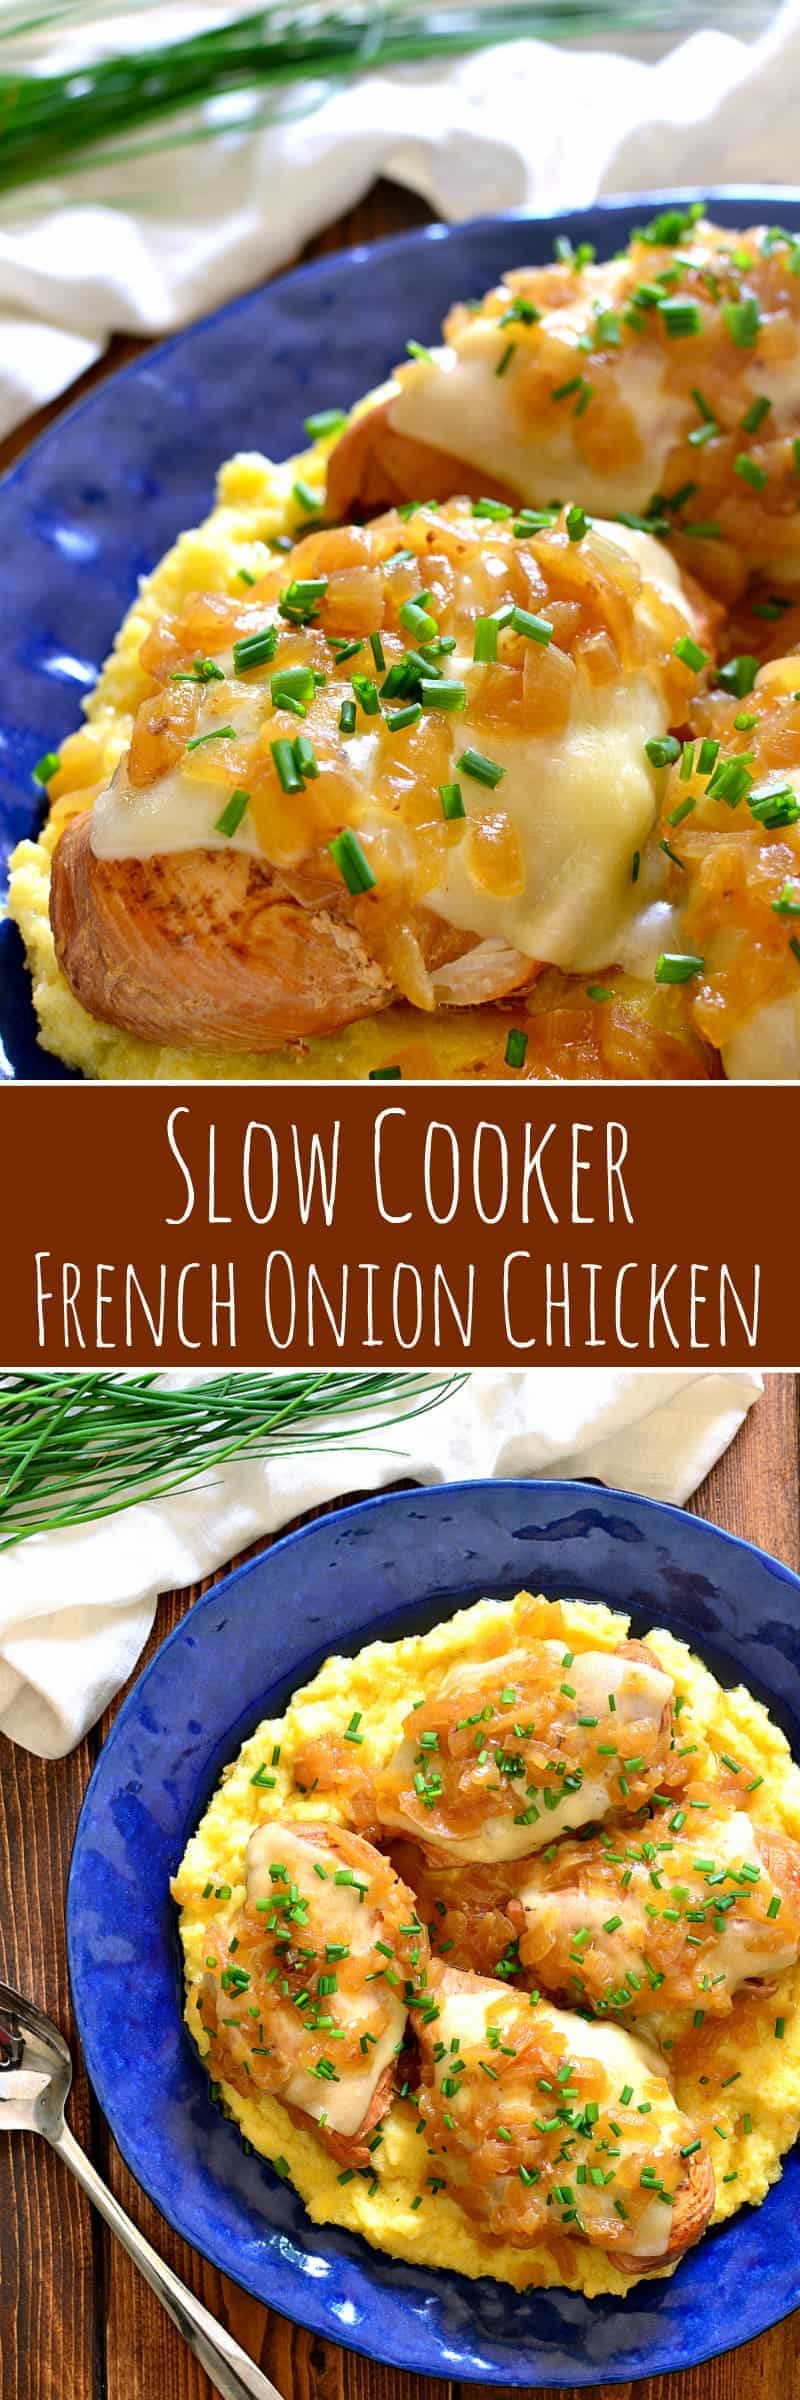 Slow Cooker French Onion Chicken is packed with the delicious flavors of French Onion Soup....including the cheese! Perfect for busy weeknights and destined to become a new family favorite!